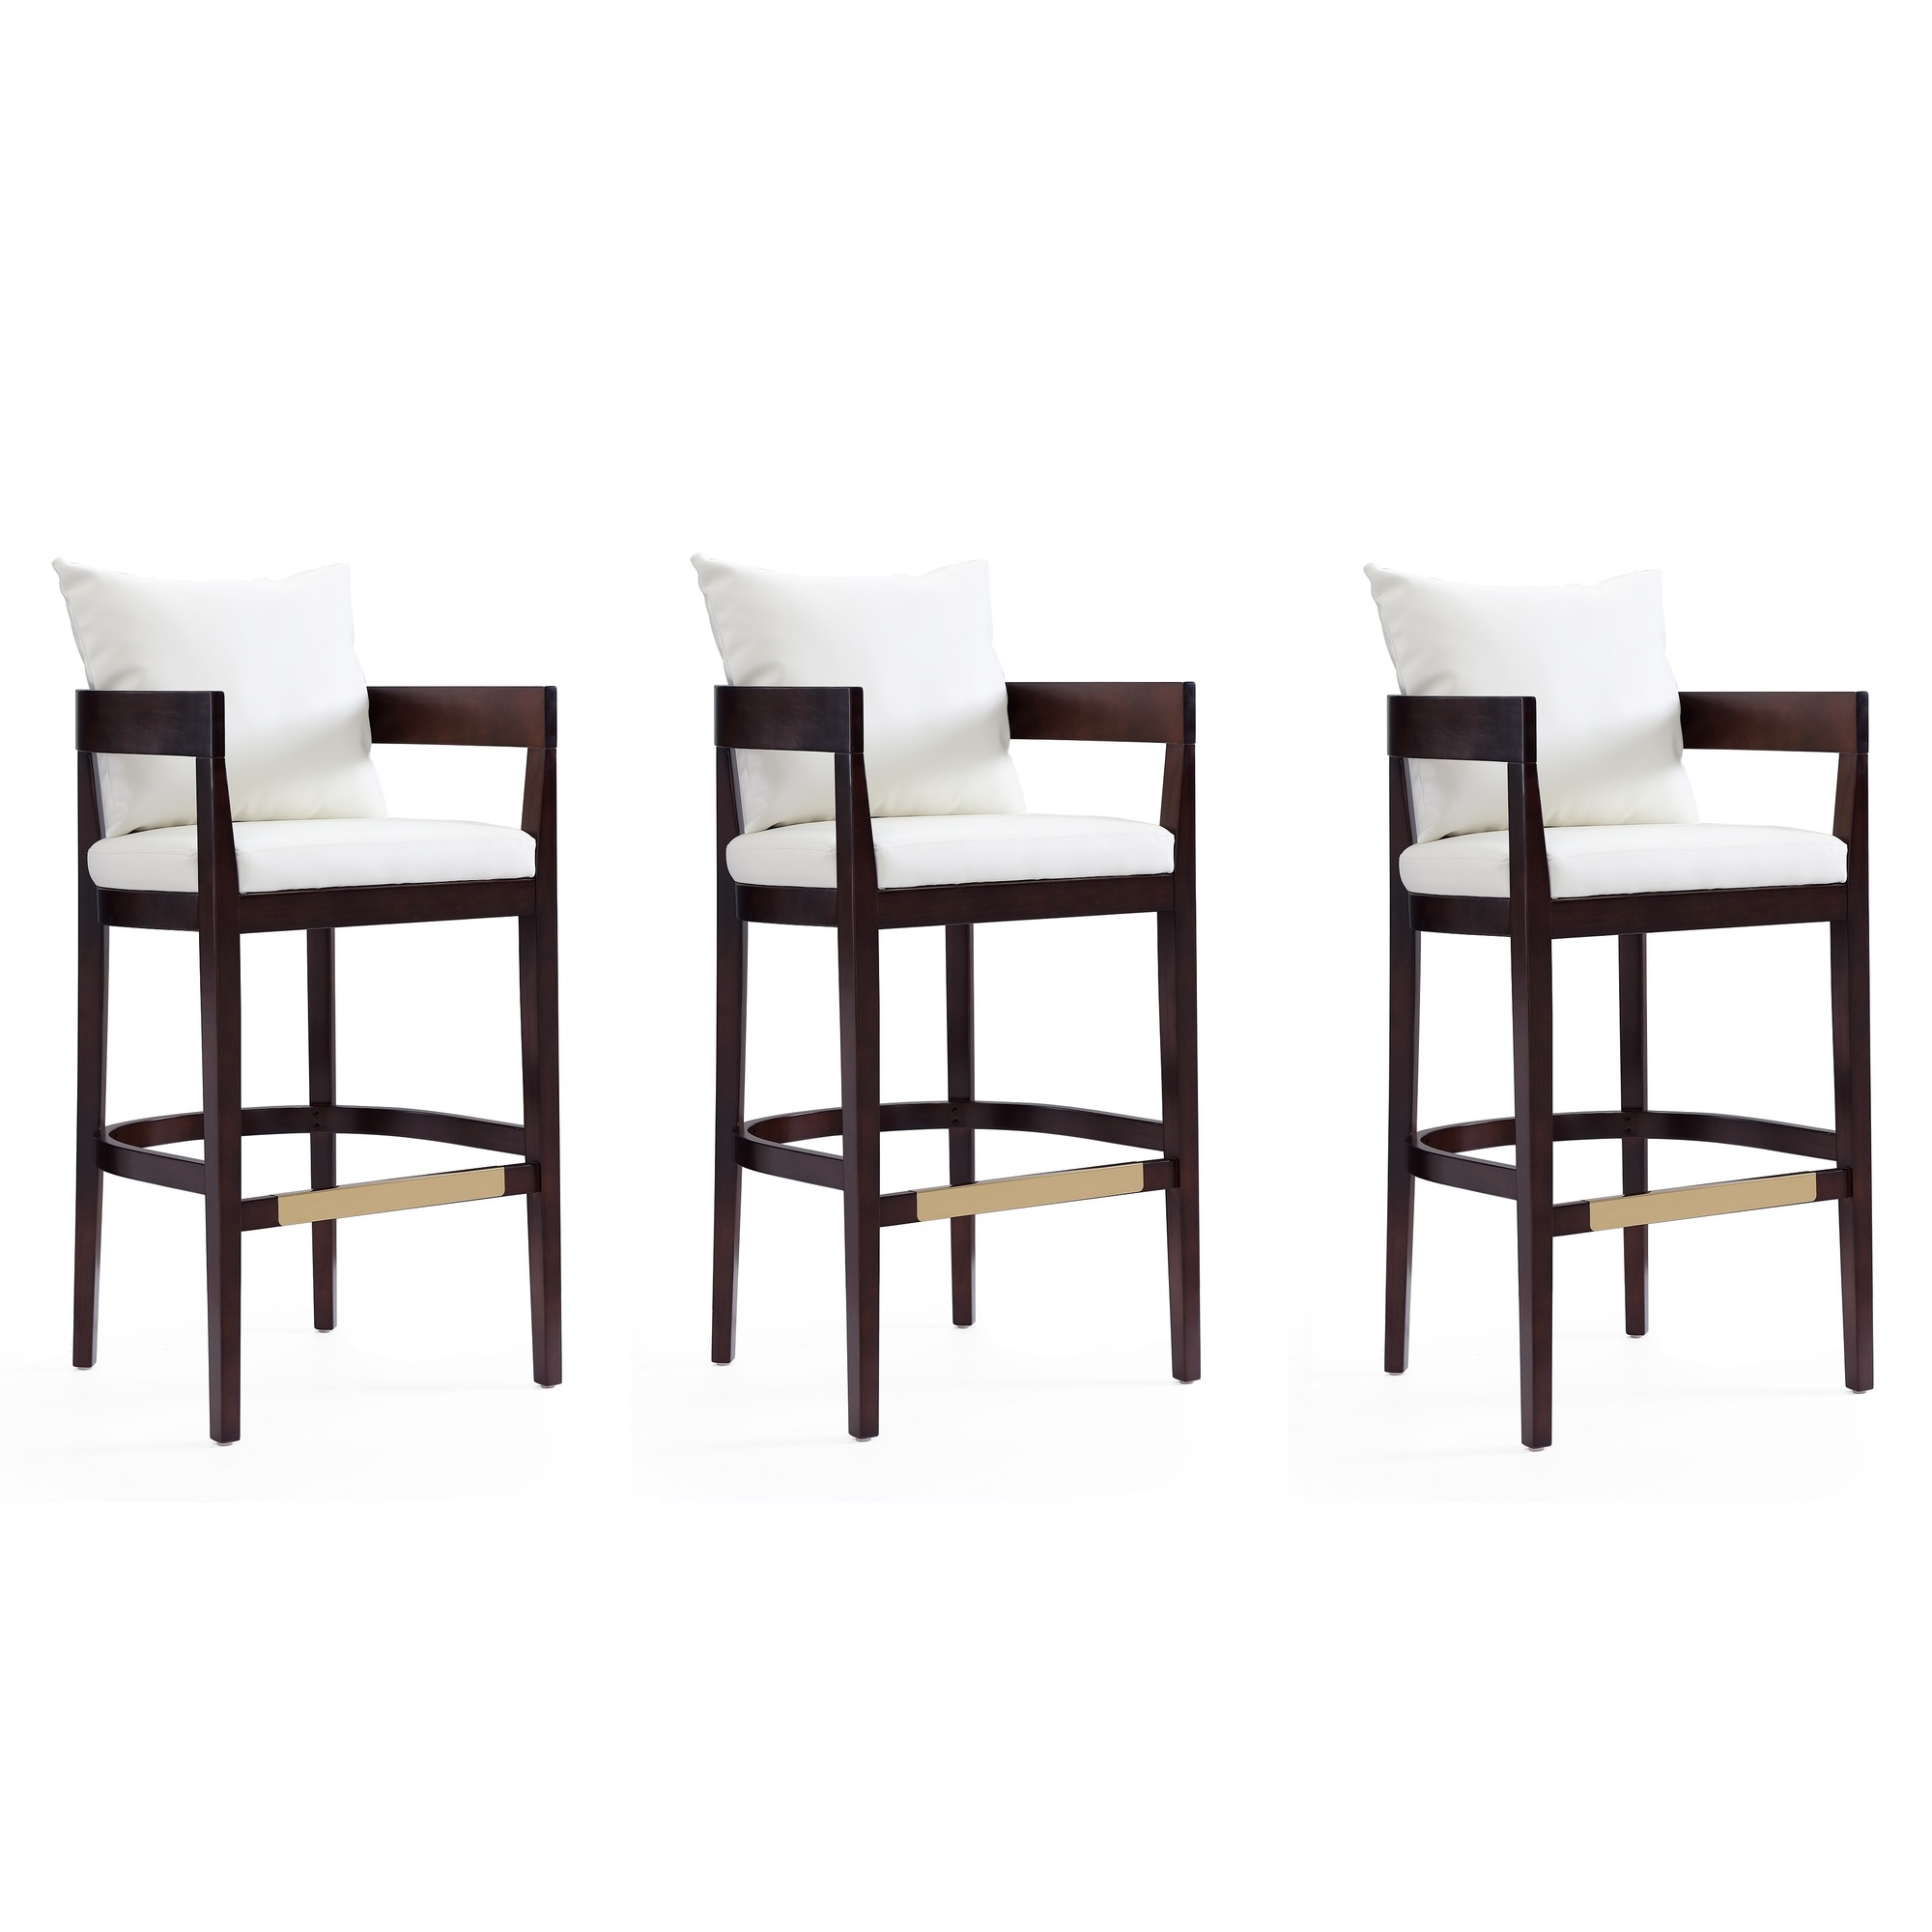 Manhattan Comfort, Ritz 38Inch Ivory Beech Wood Stool Set of 3 Primary Color Ivory, Included (qty.) 3 Model 3-BS013